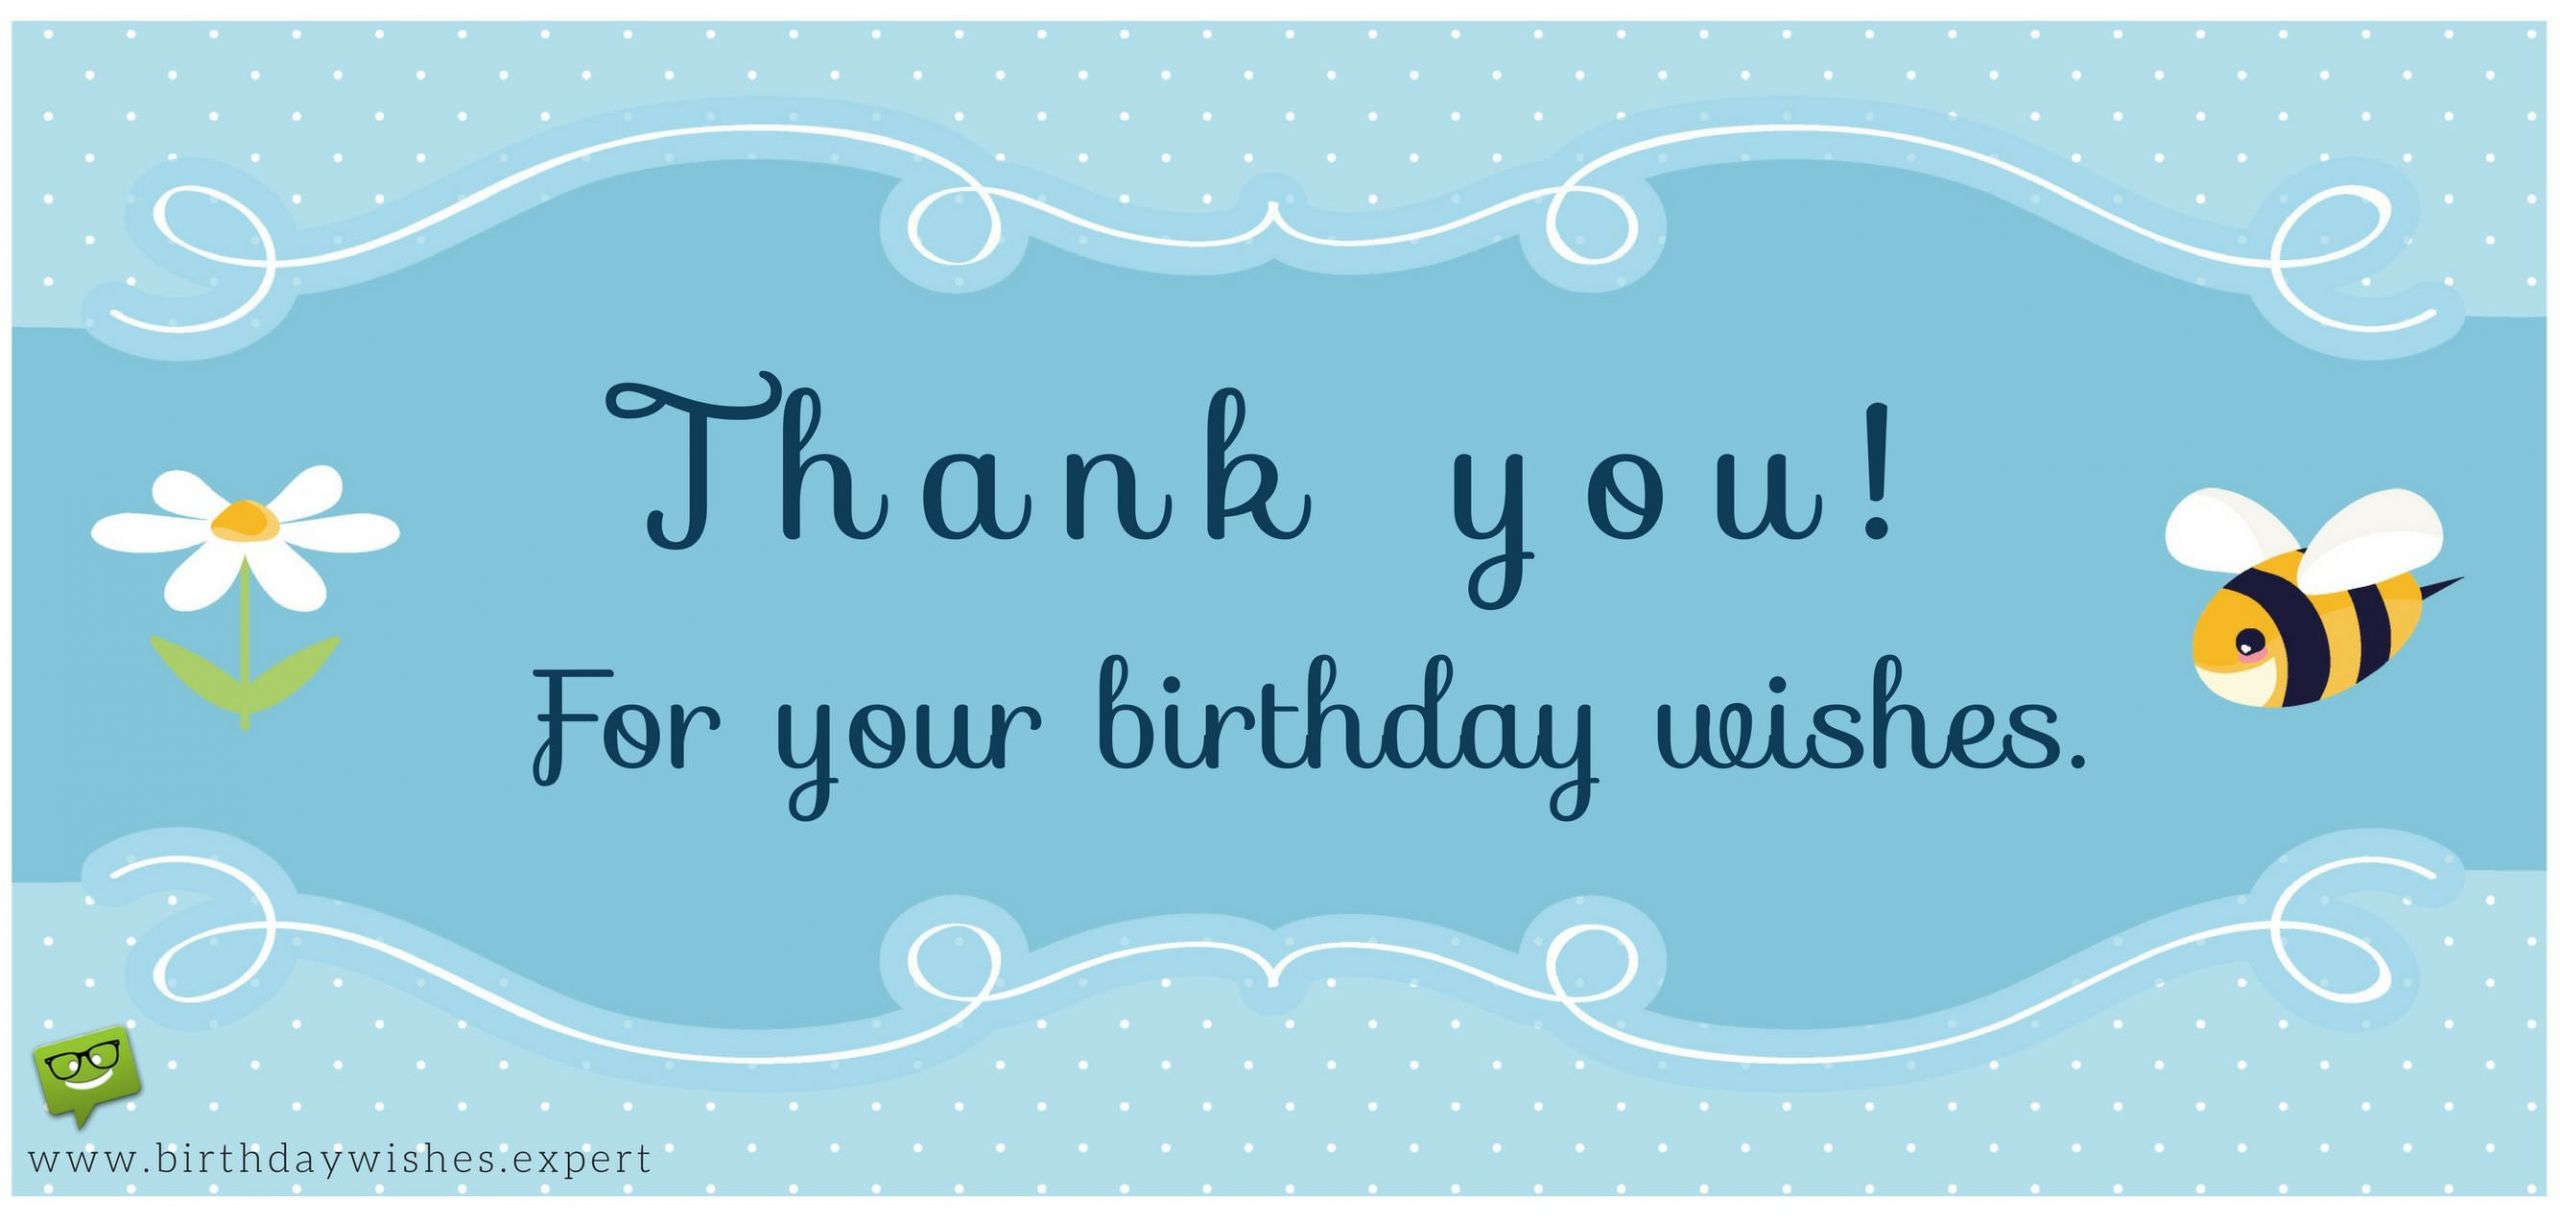 Thanking Someone For Birthday Wishes
 Thank You Notes for Your Birthday Wishes